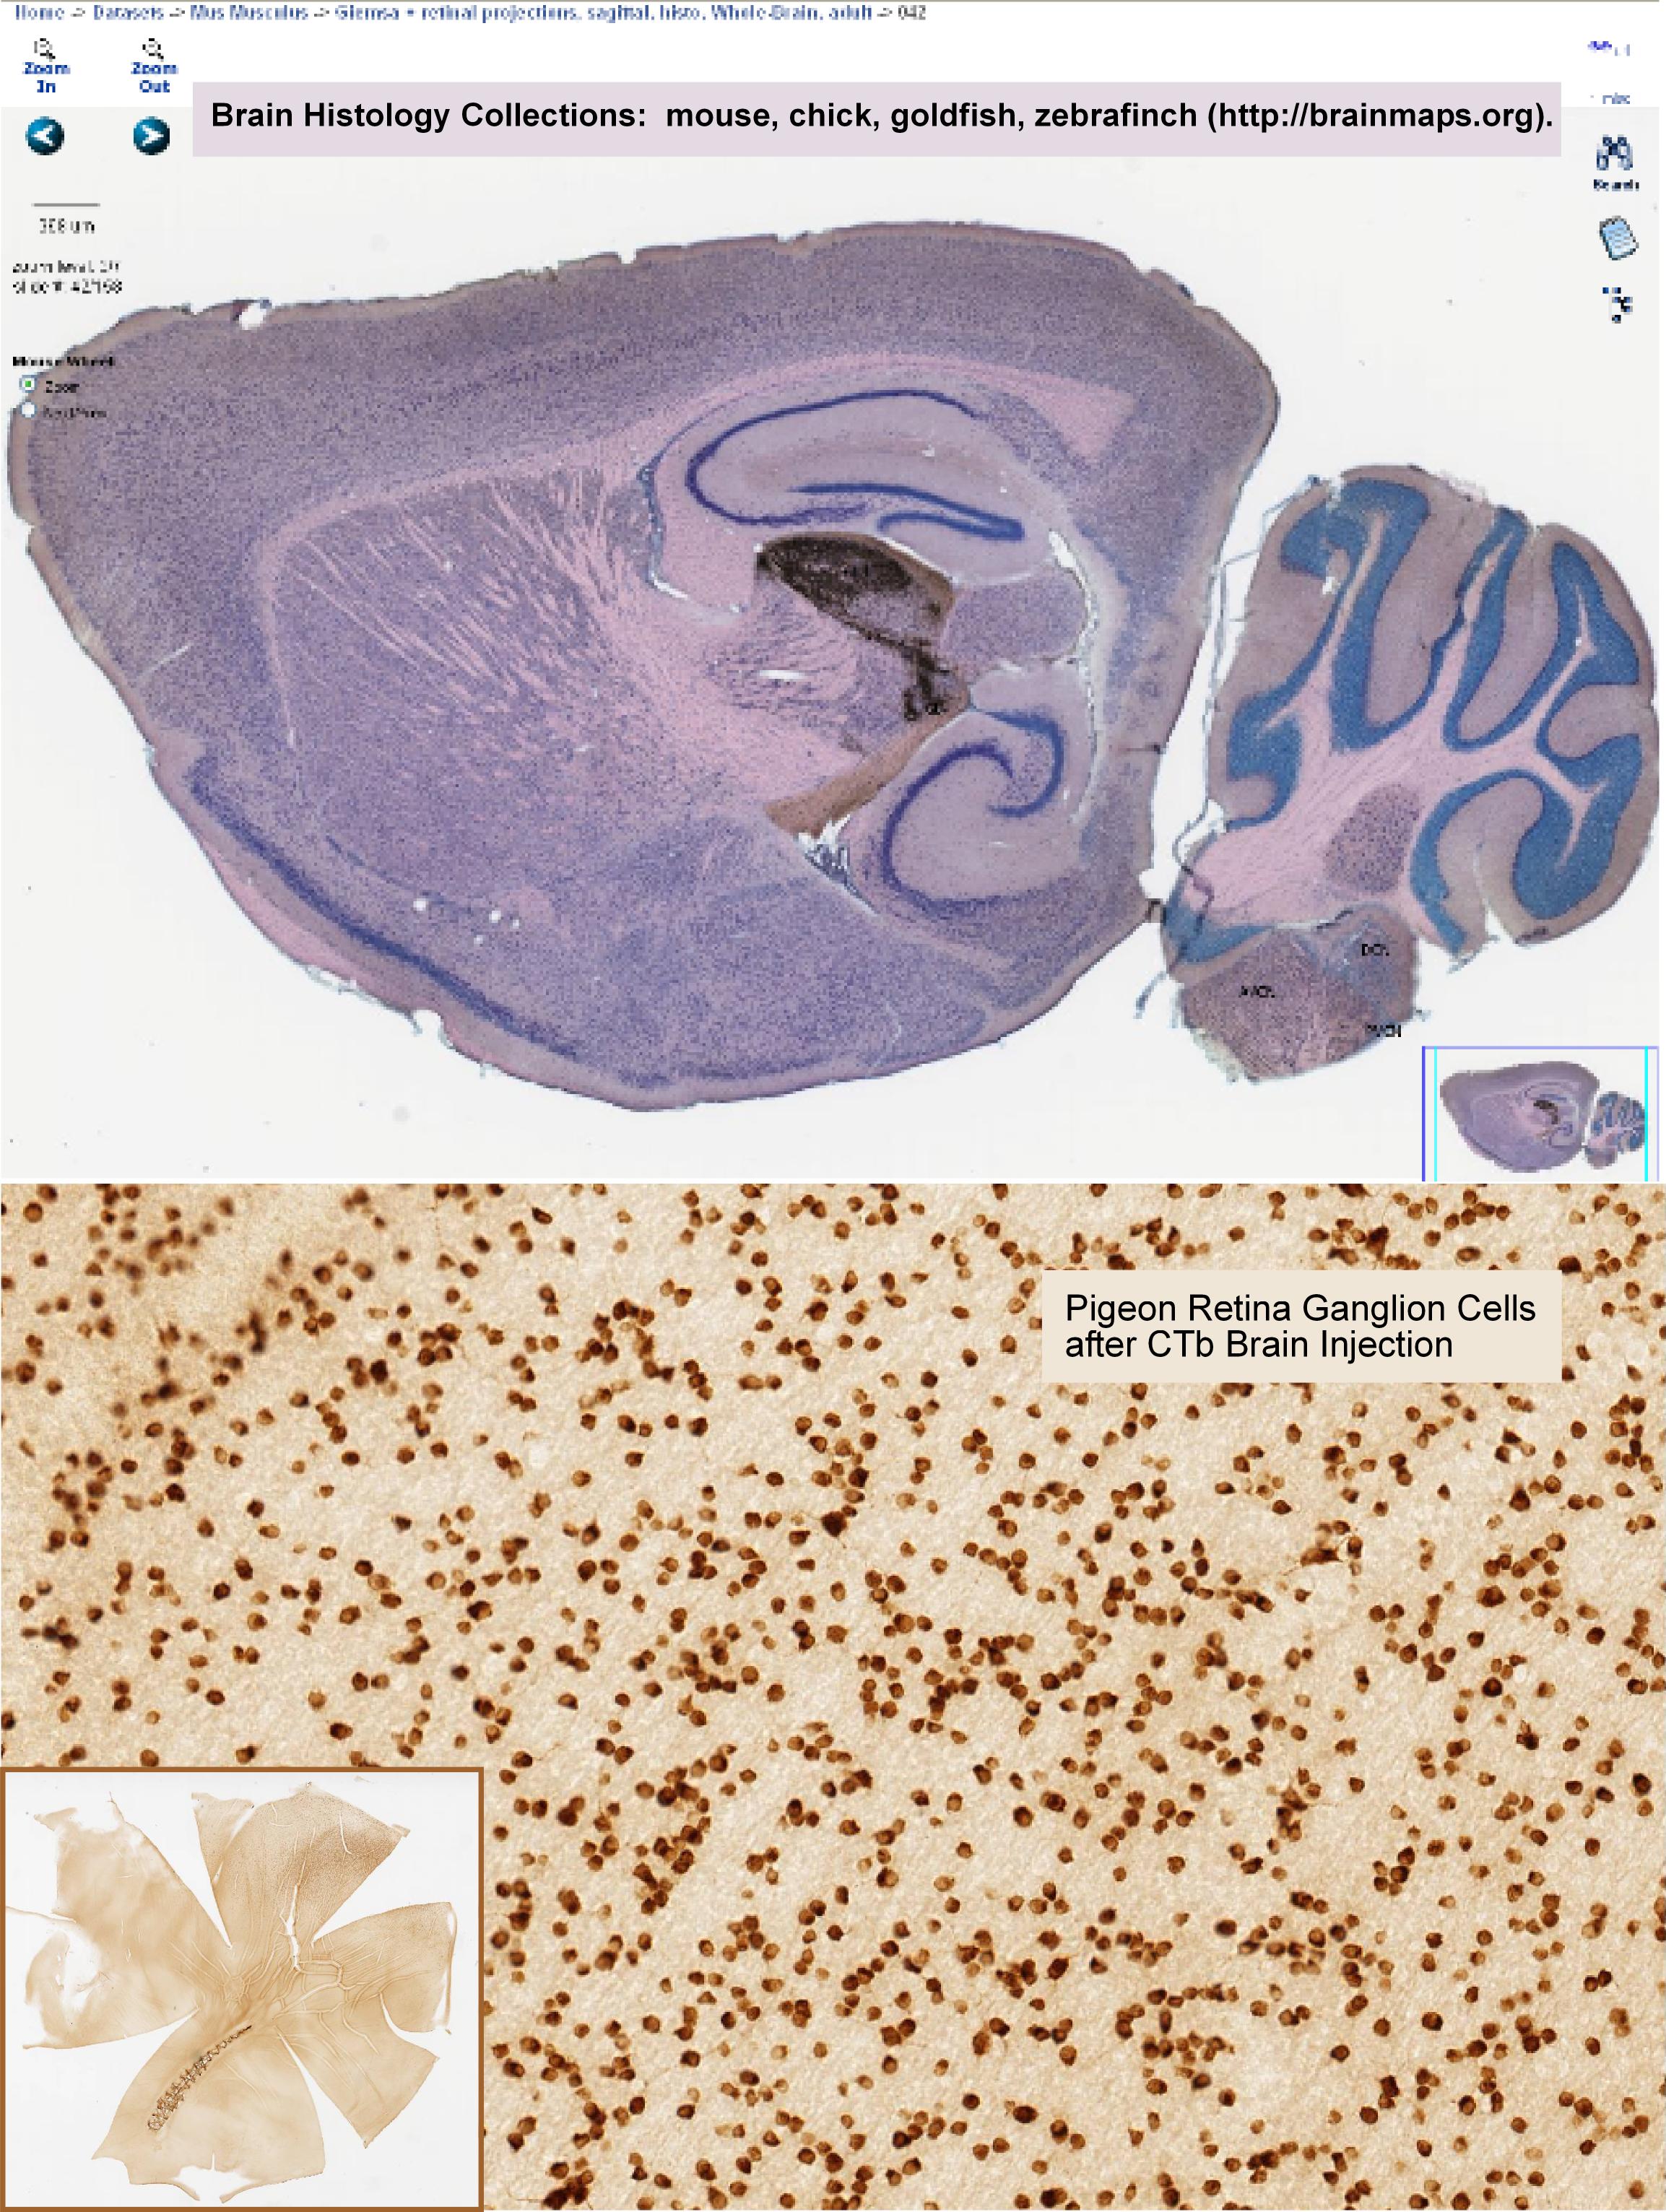 Brain Histology Collections / Pigeon Retina Ganglion Cells after CTb Brain Injection